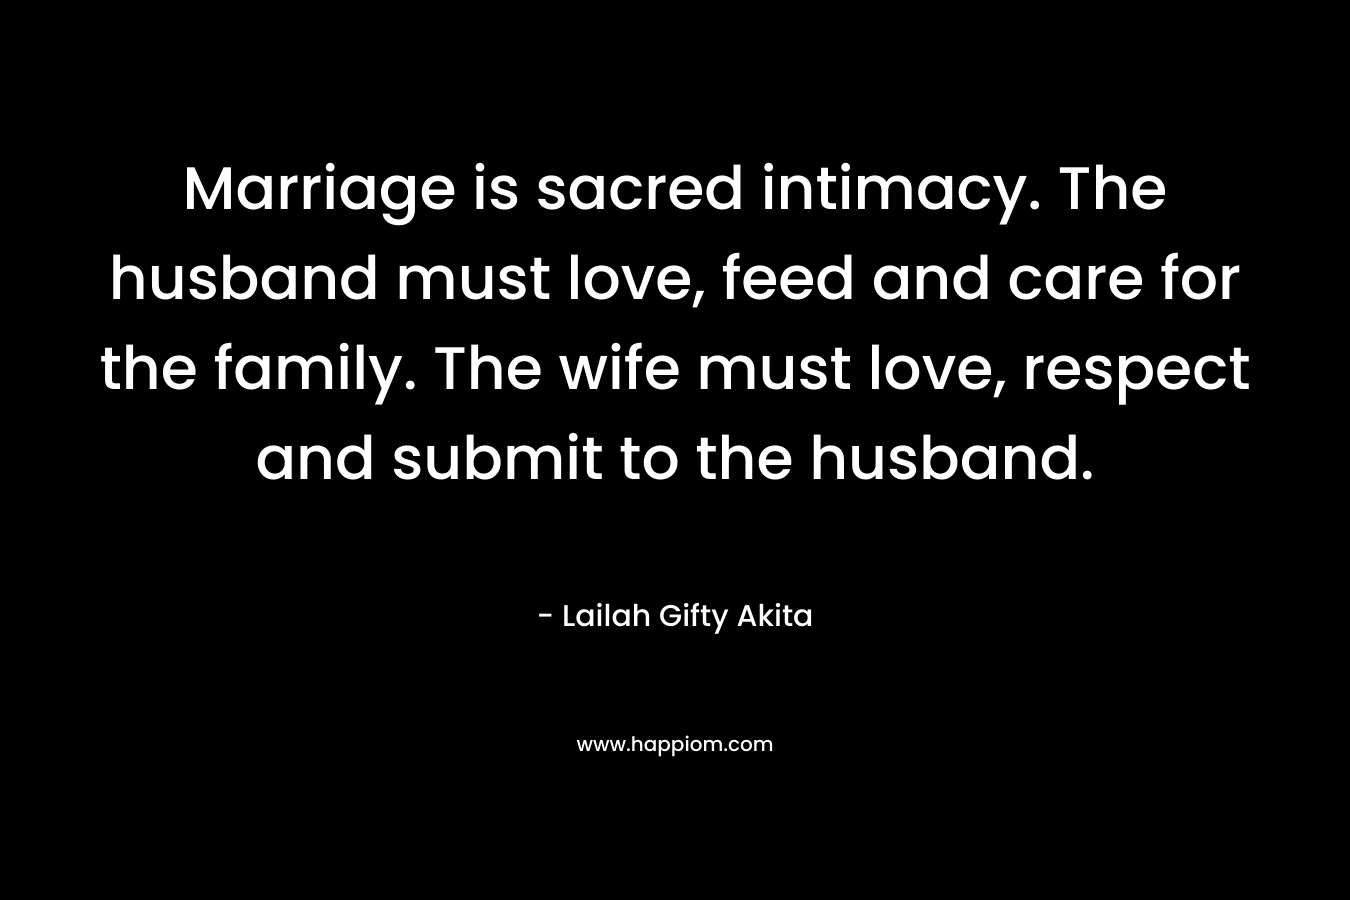 Marriage is sacred intimacy. The husband must love, feed and care for the family. The wife must love, respect and submit to the husband.